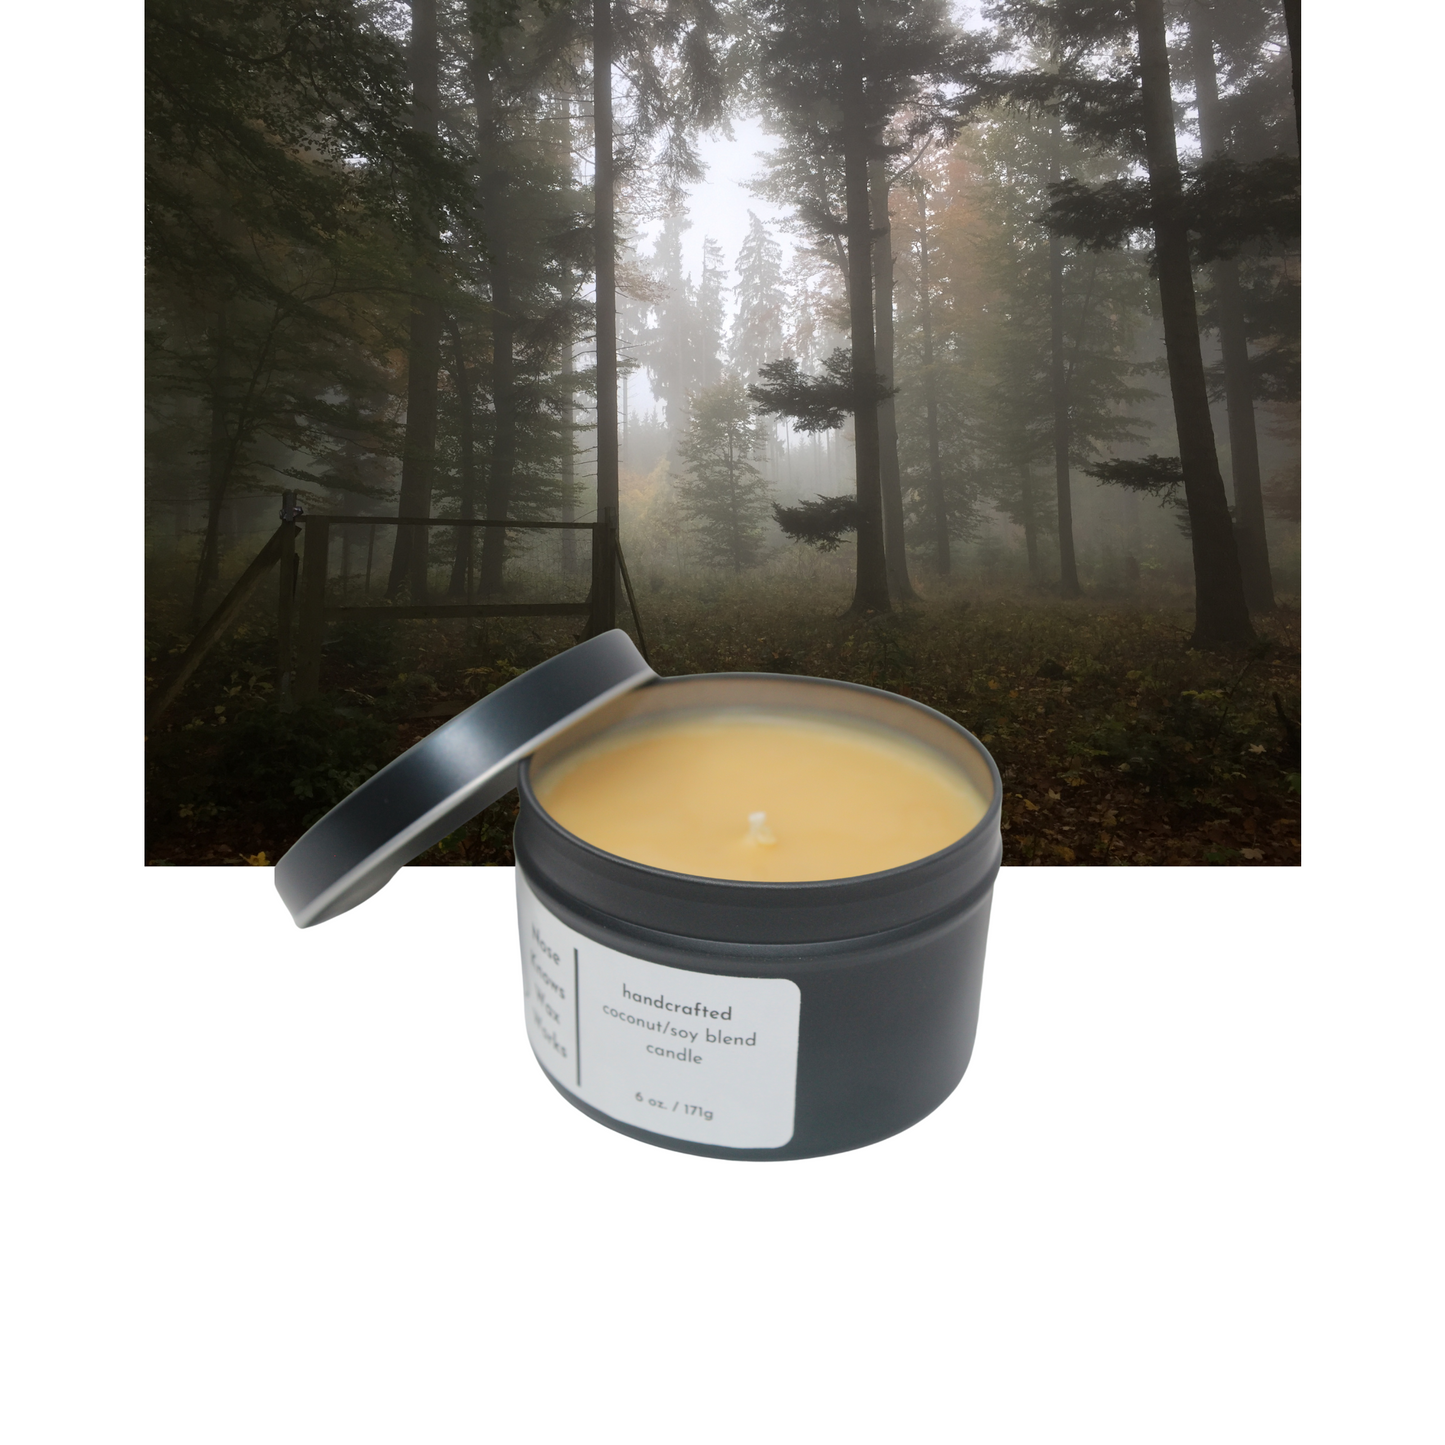 Cypress and Bayberry Candle